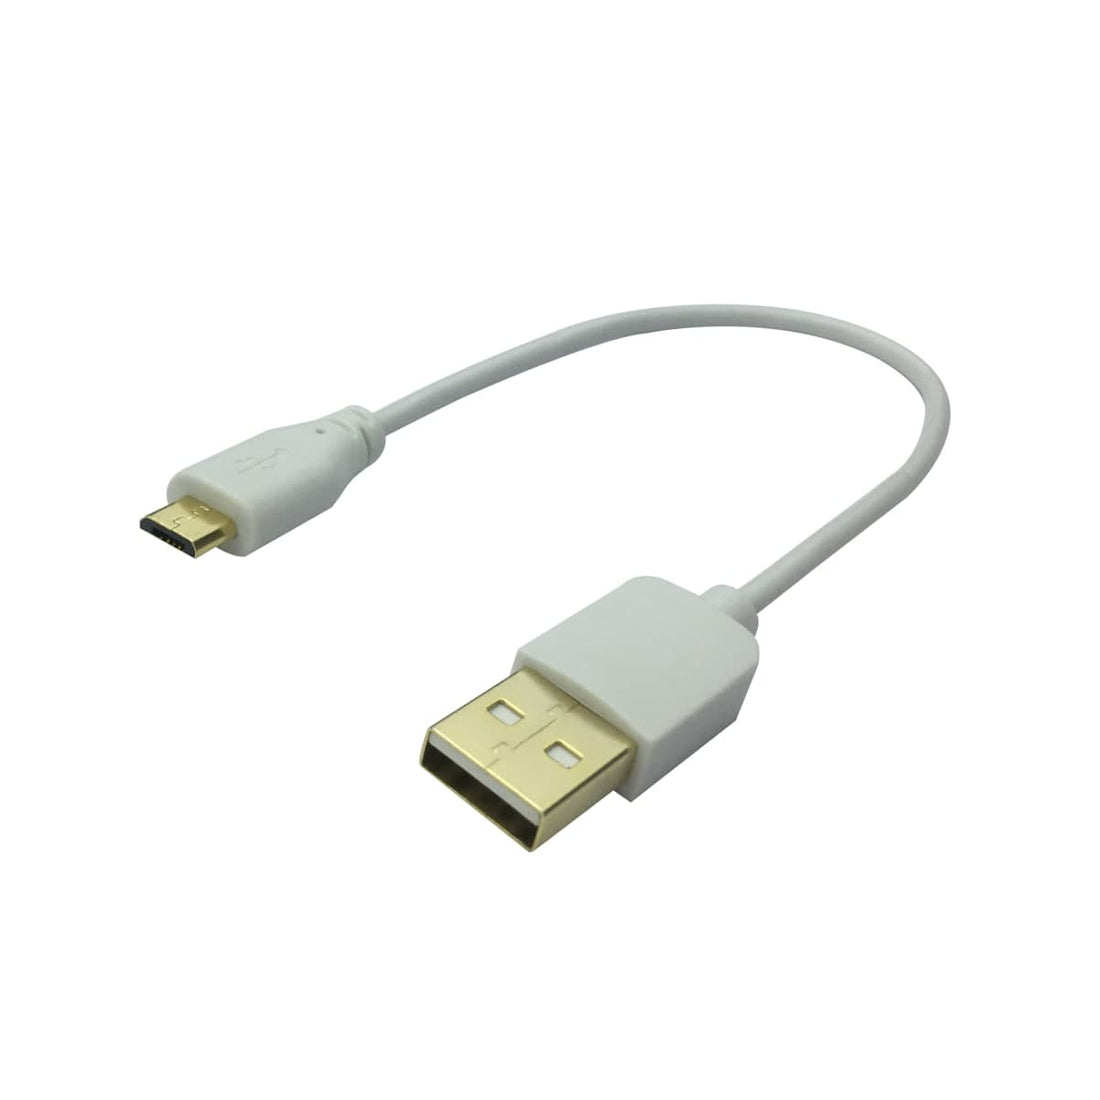 20 CM MICRO USB/TYPE A CABLE - best price from Maltashopper.com BR420005329